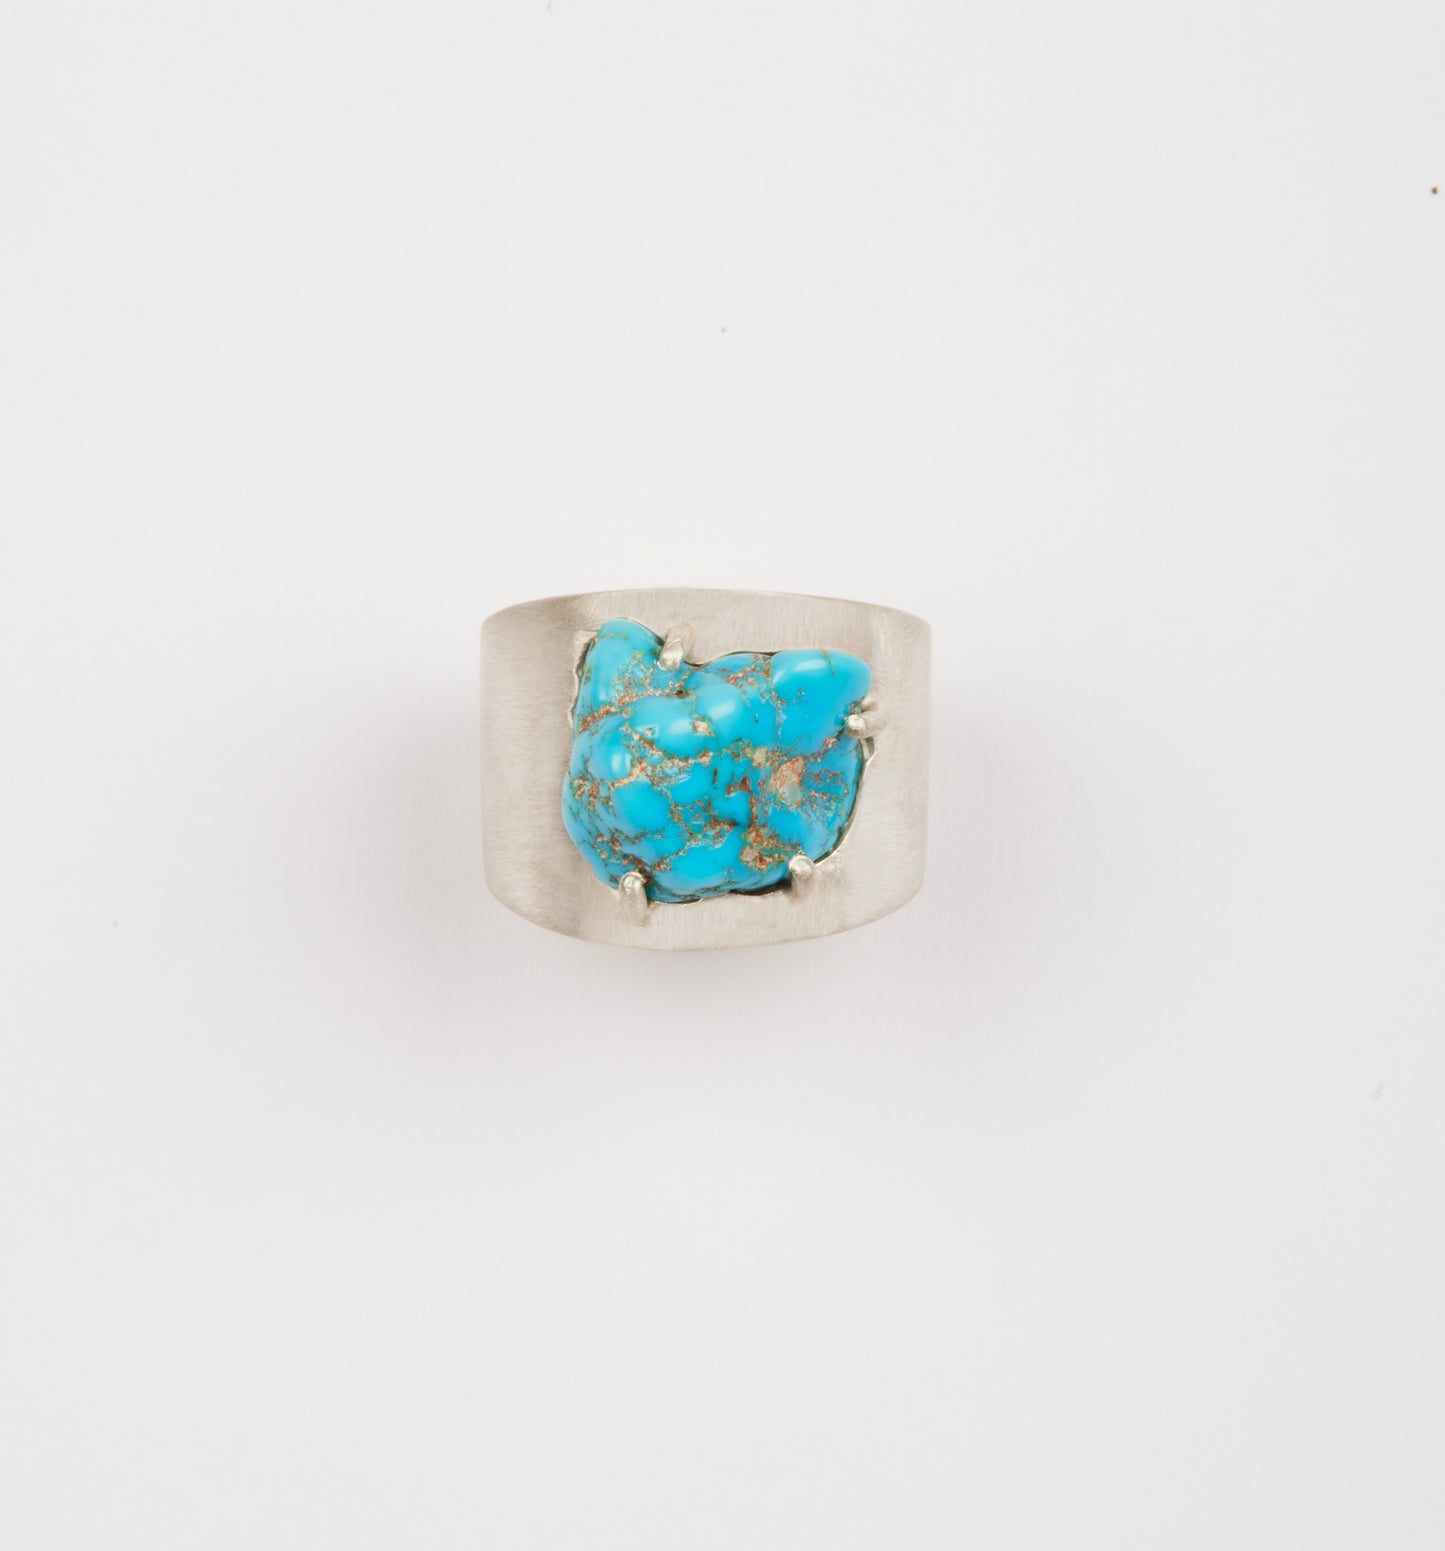 Matte White Gold Ring with Turquoise Nuggets